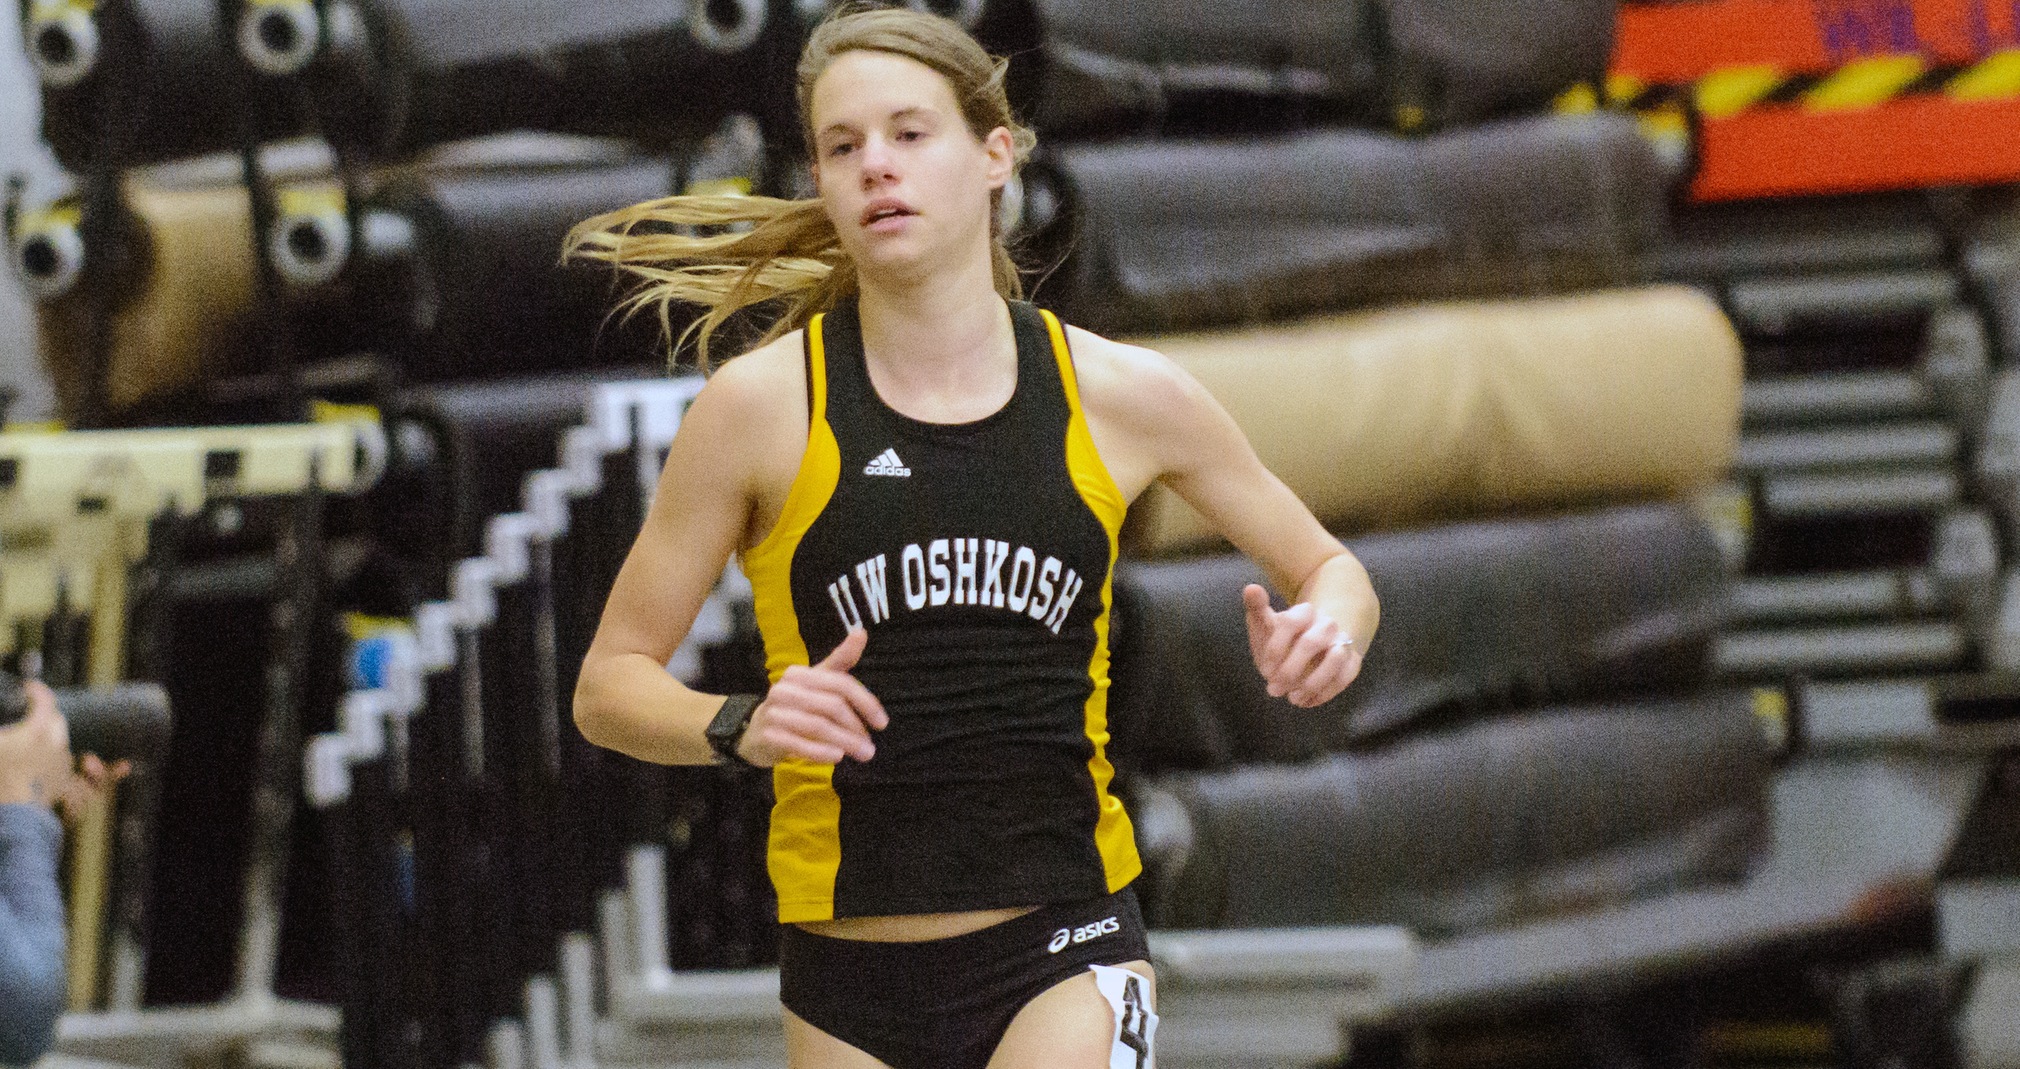 Kristen Linzmeier defeated 31 other contestants in the 800-meter run with her winning time of 2:16.19.